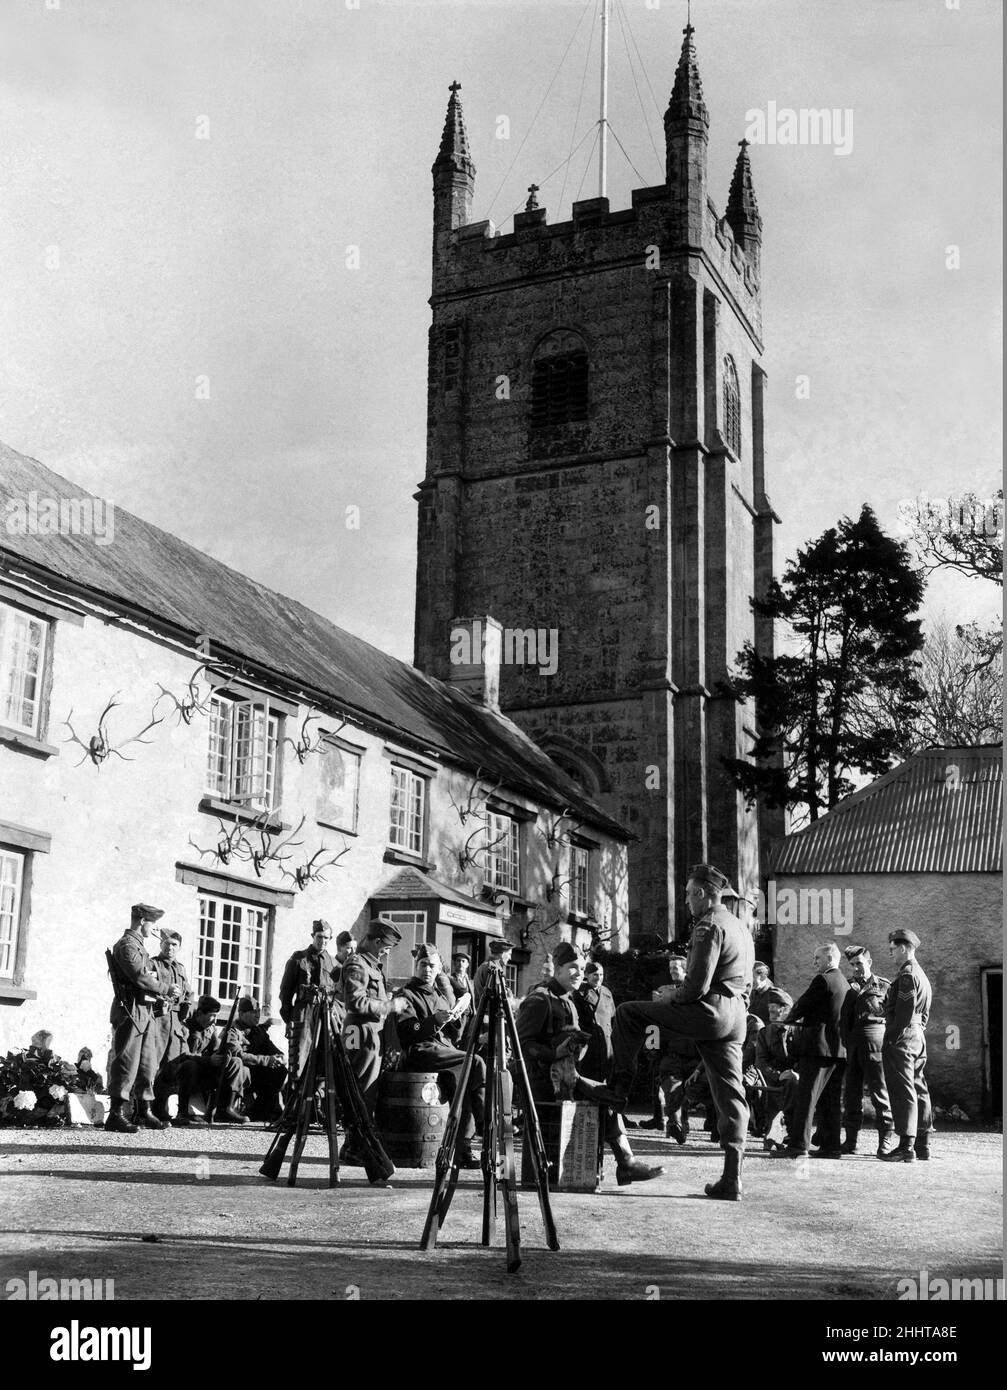 The 400 year old antique Royal Oak Inn, nestling under the rustic shadow of the village church in Pillaton, was the place of parade for the last 'Fallin' of the Pillaton G Platoon' Number 2 Company Home Guard formed exclusively of farmers. The Guards are pictured having a drink and chat before breaking up after they 'fell out'.  29th October 1944. Stock Photo